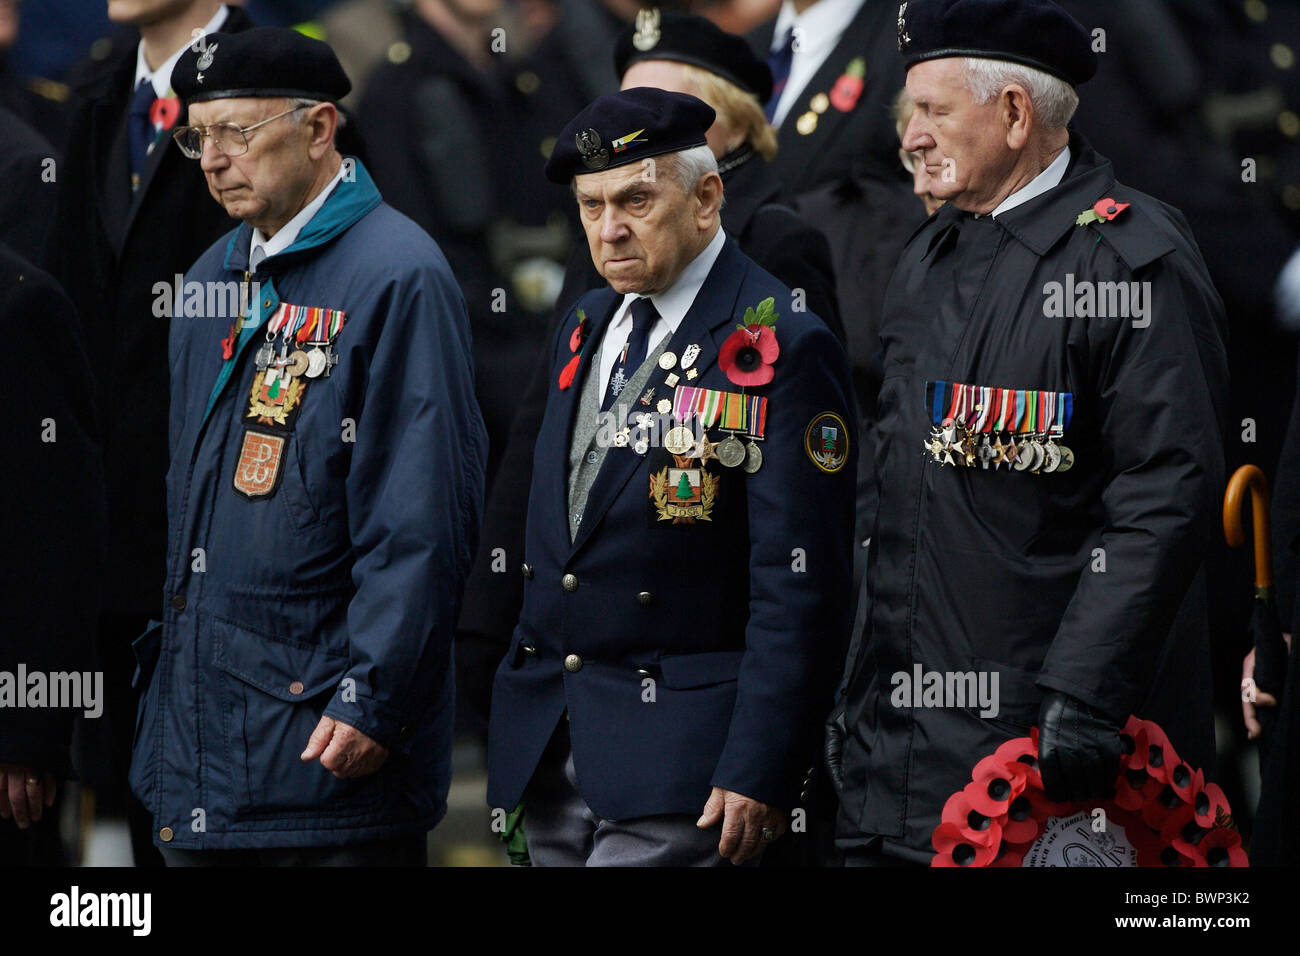 Veterans with medals and poppies march past at the Cenotaph in Whitehall on Remembrance Sunday to commemorate the war dead Stock Photo